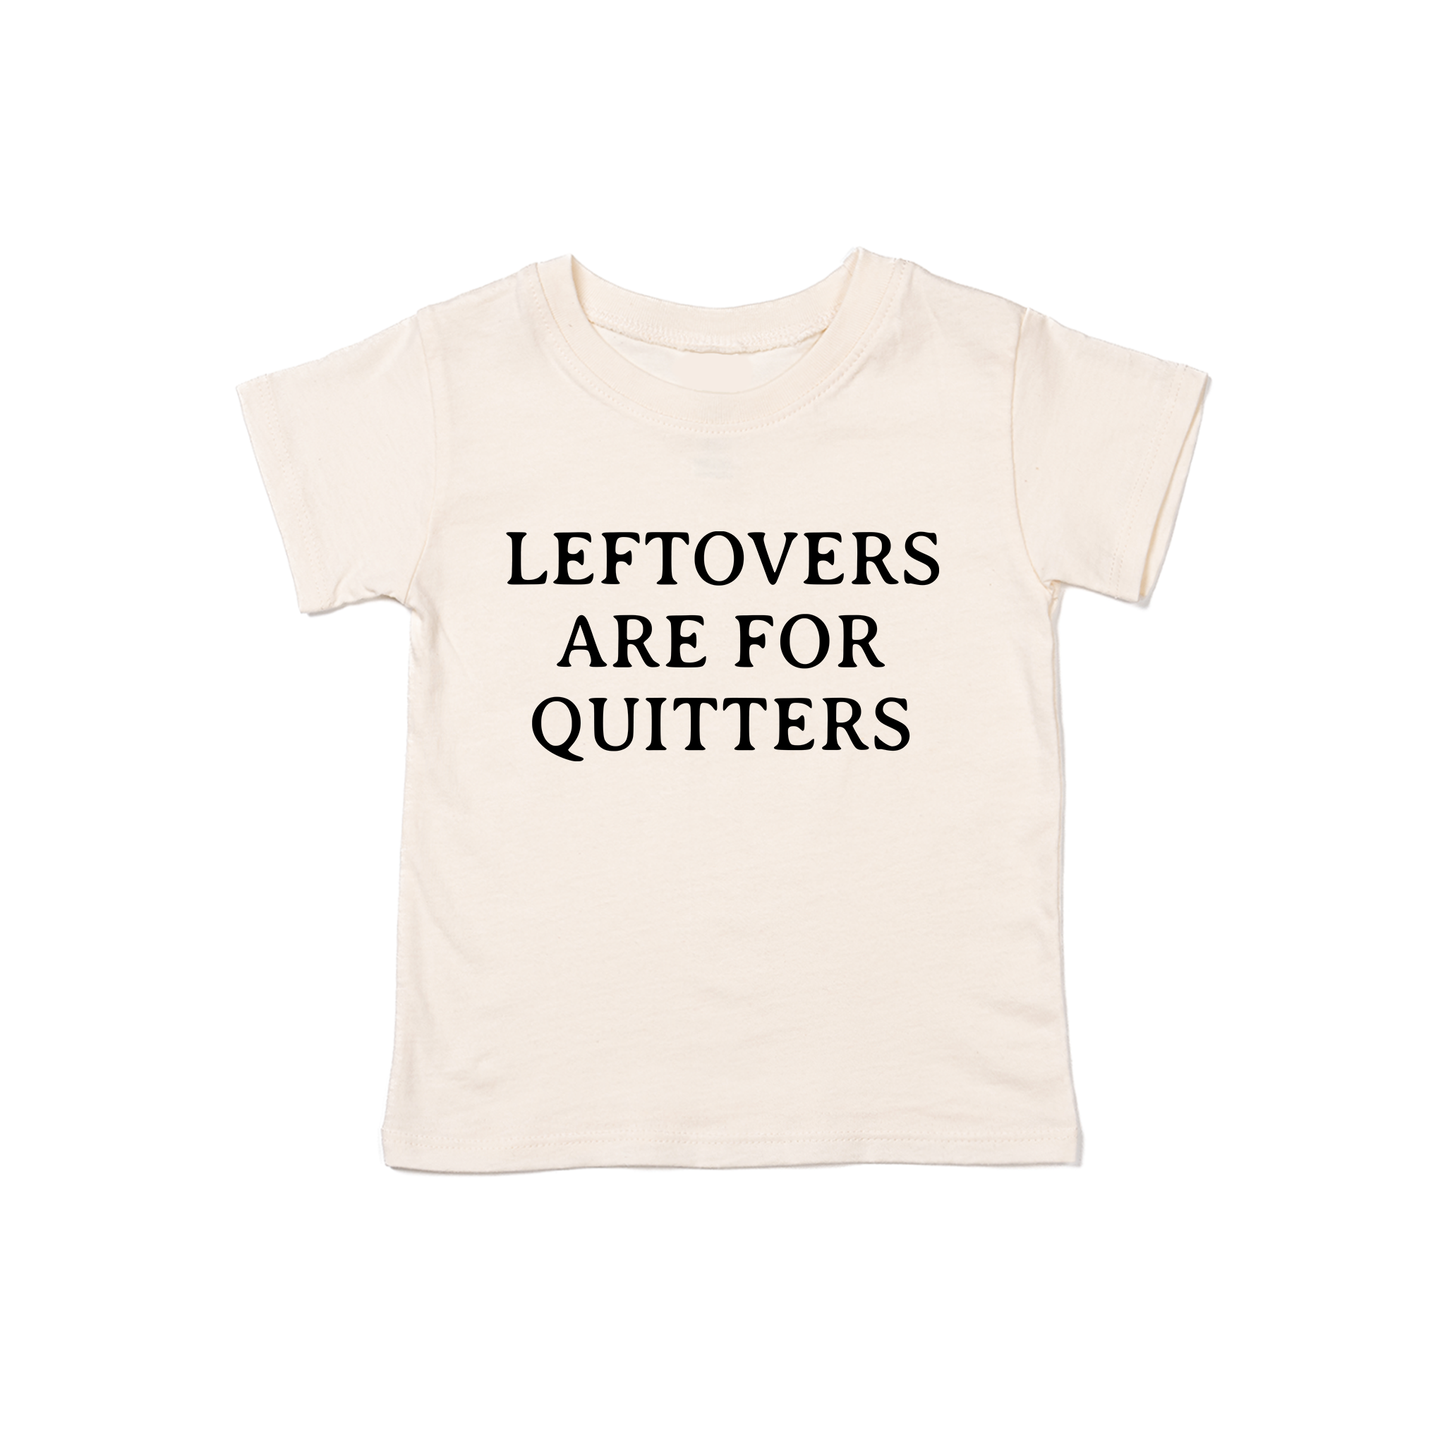 Leftovers are for Quitters (Black) - Kids Tee (Natural)